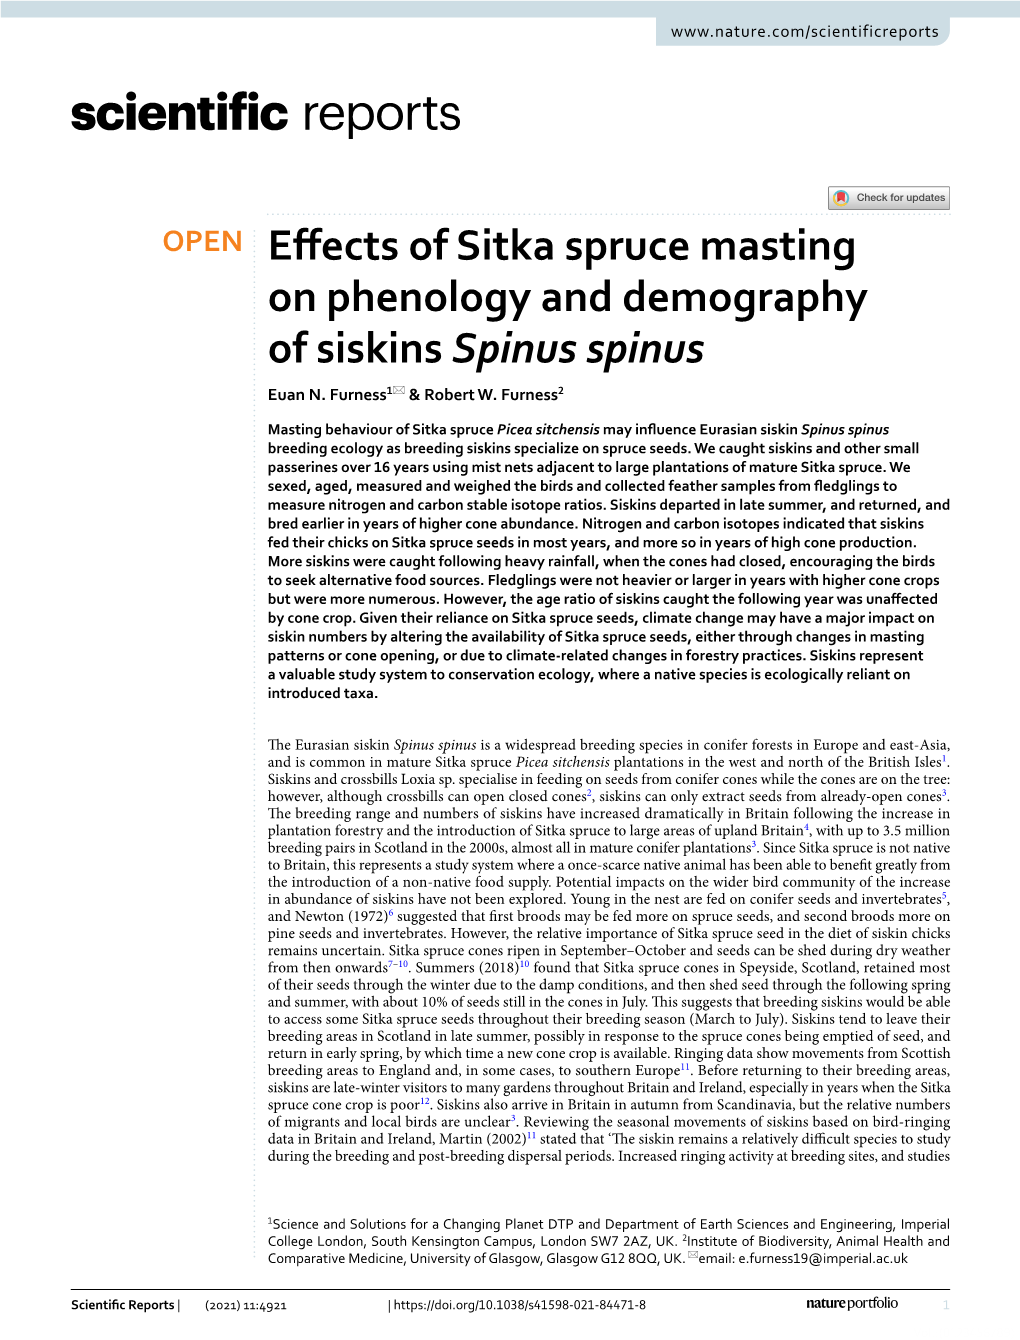 Effects of Sitka Spruce Masting on Phenology and Demography Of